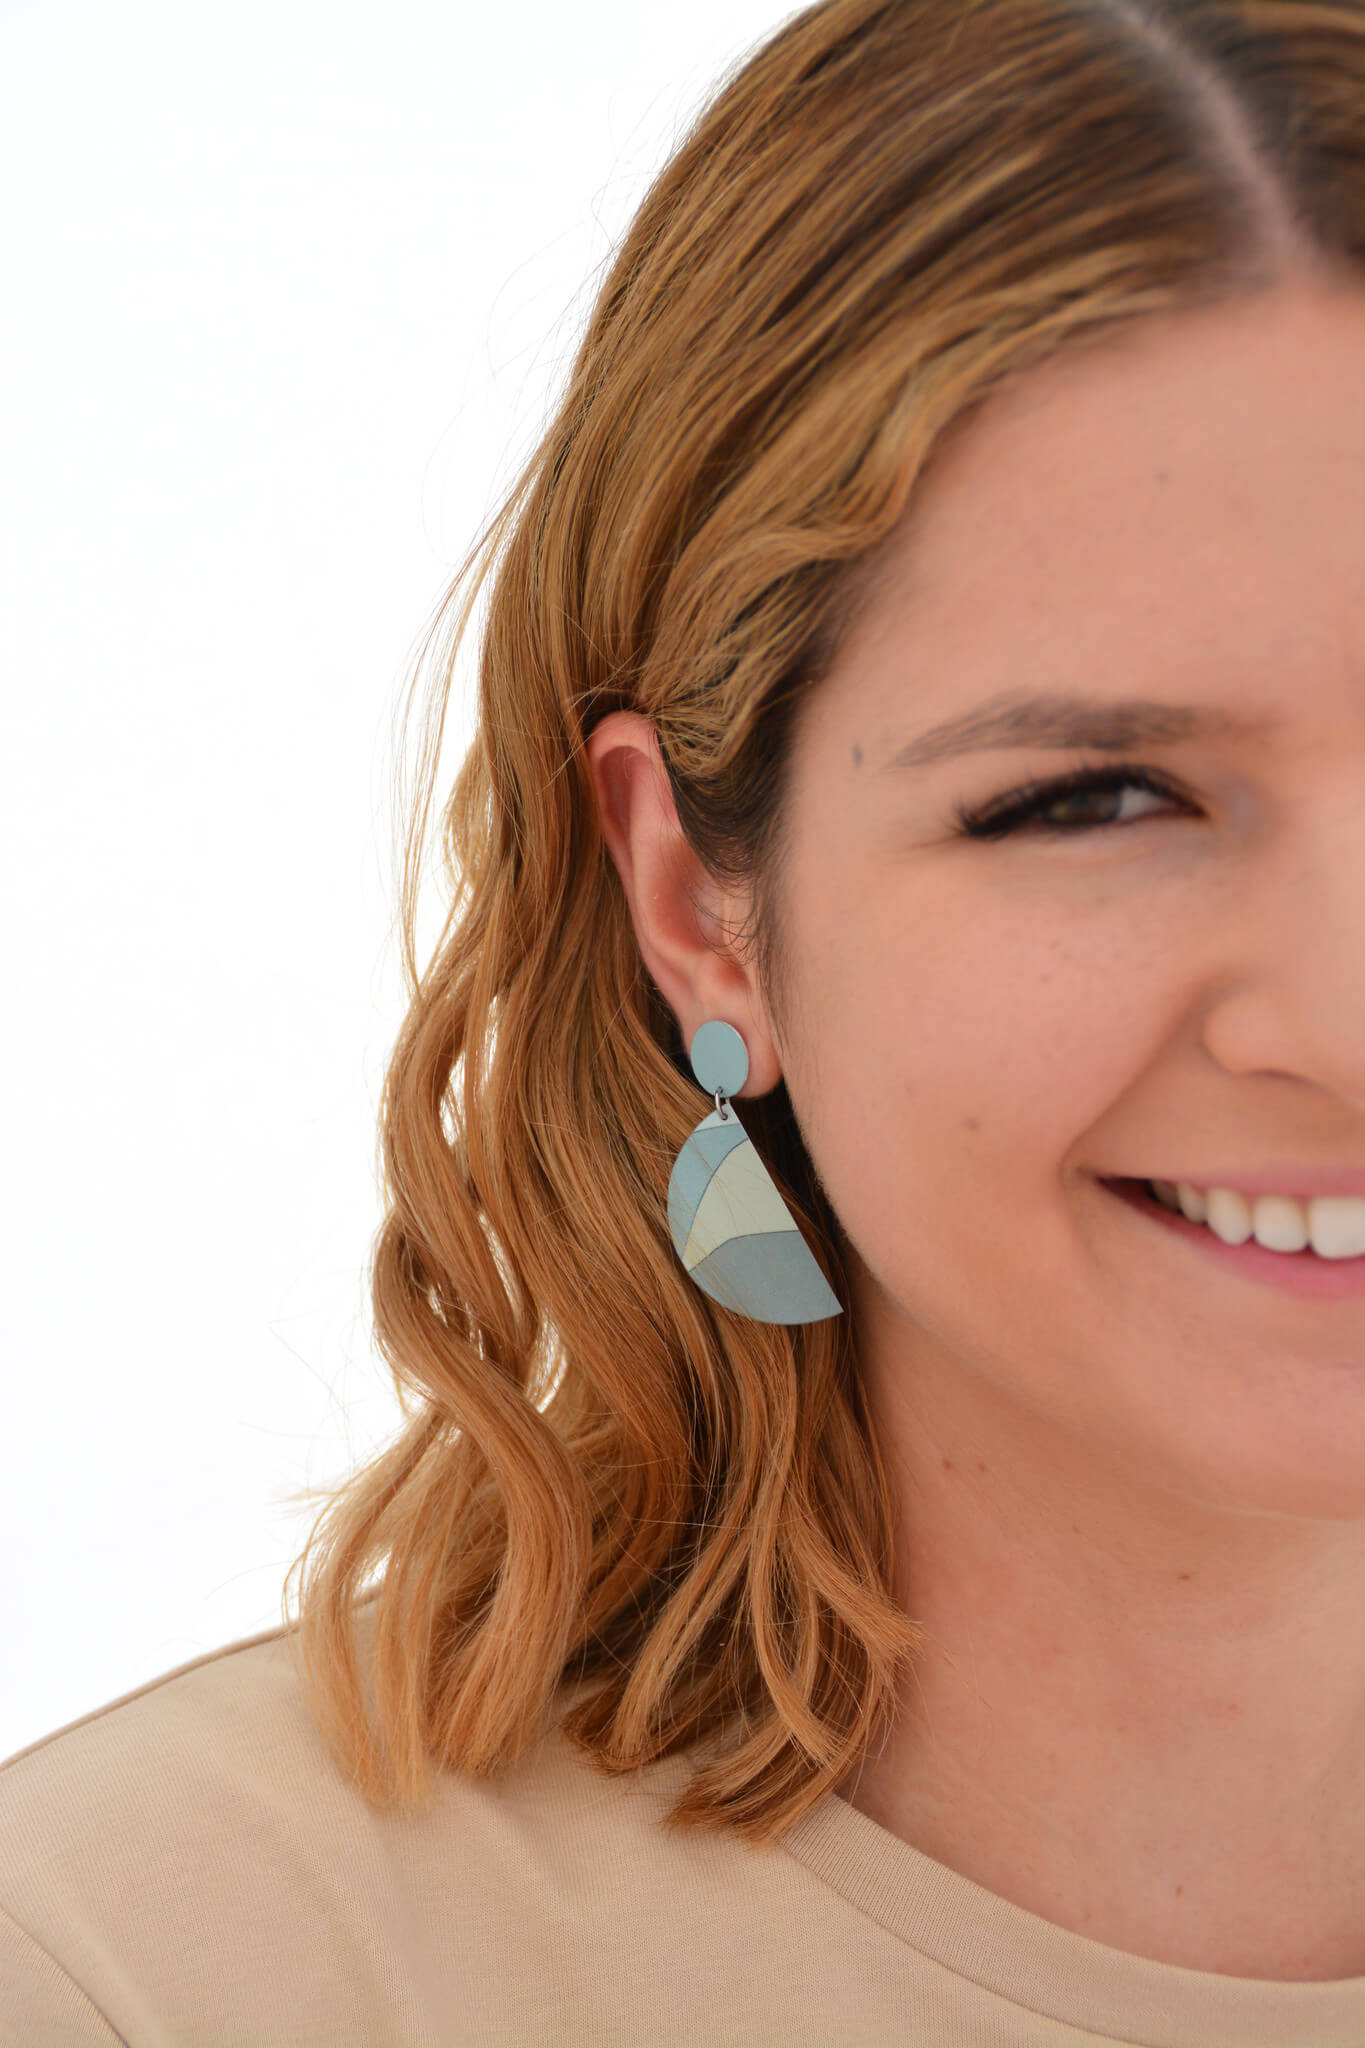 The image shows a woman wearing a Kitty Came Home double drop stud semi-circle earring in her right ear. The top stud is a 12 millimetre diameter circle, and the lower dangle is a 36 millimetre diameter semi-circle. The design is the night grows pale by Satin and Tat. Pale blue and green forms create a landscape of gently rolling hills.